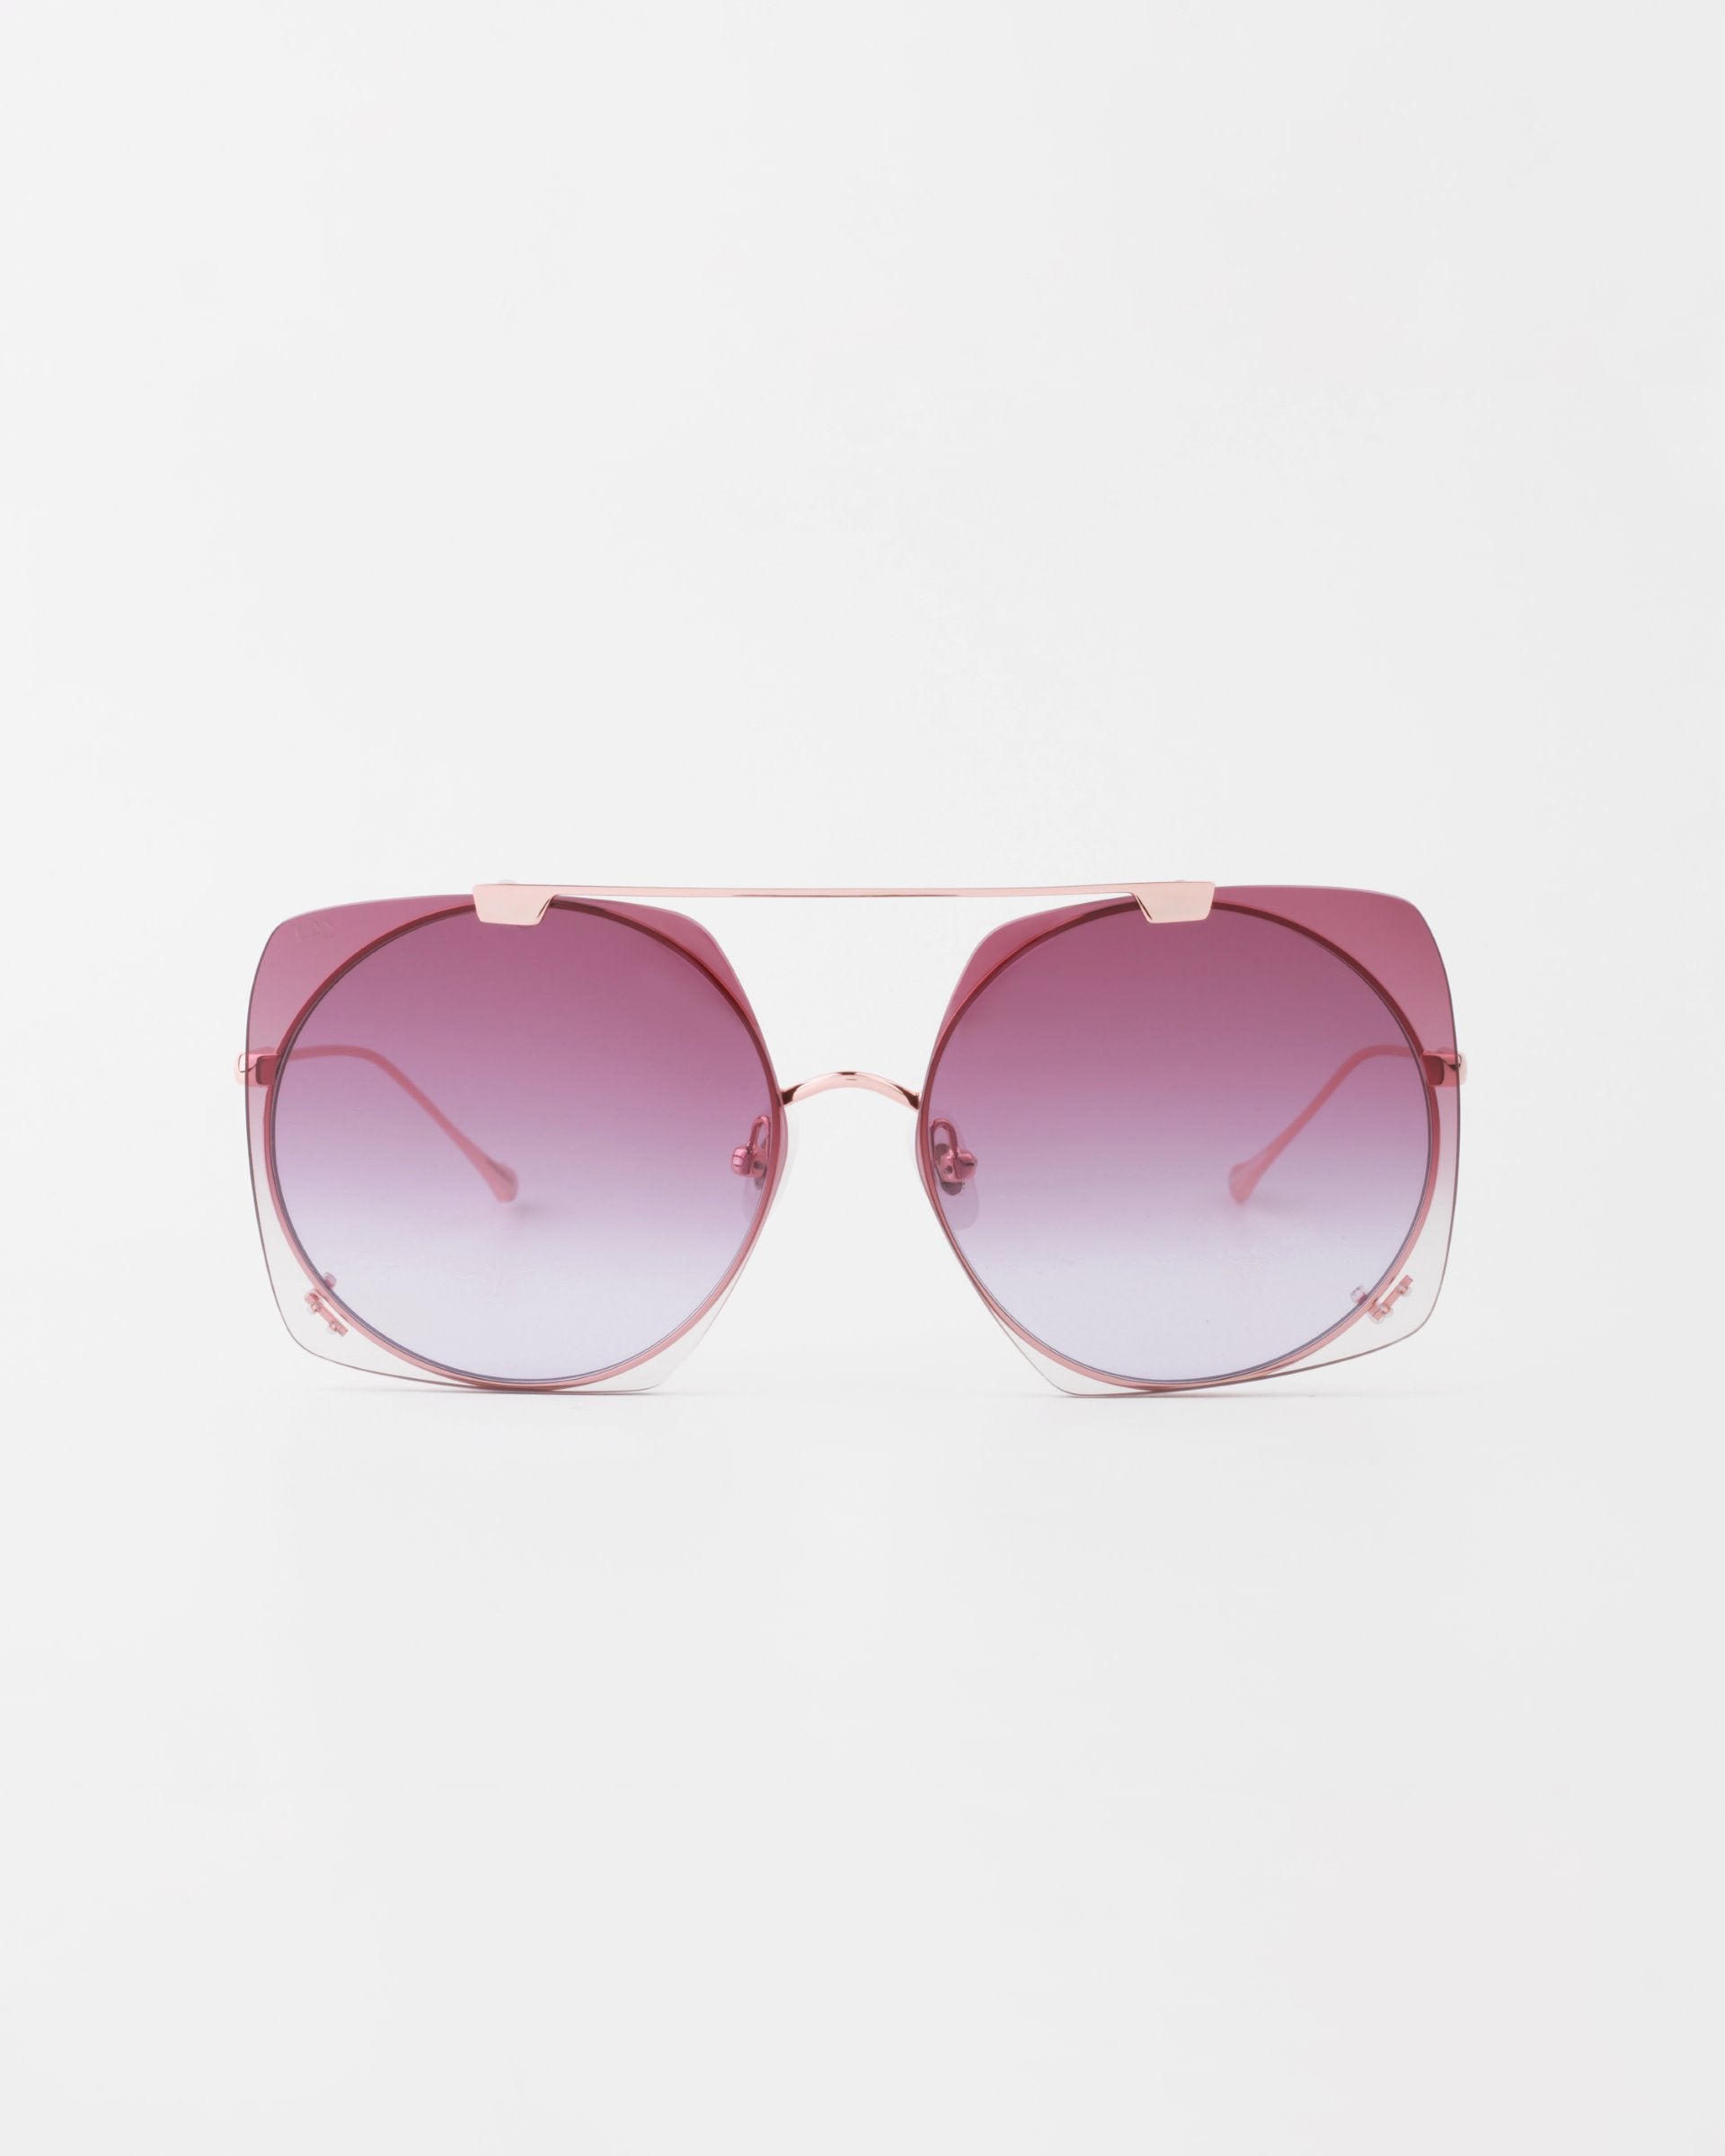 A pair of oversized, square sunglasses with a thin, 18-karat gold-plated frame. The lenses are gradient, shading from a dark pink at the top to a lighter pink at the bottom. The slim temples feature a subtle curve. These UVA &amp; UVB-protected shades, For Art&#39;s Sake® Last Summer, are set against a plain white background.